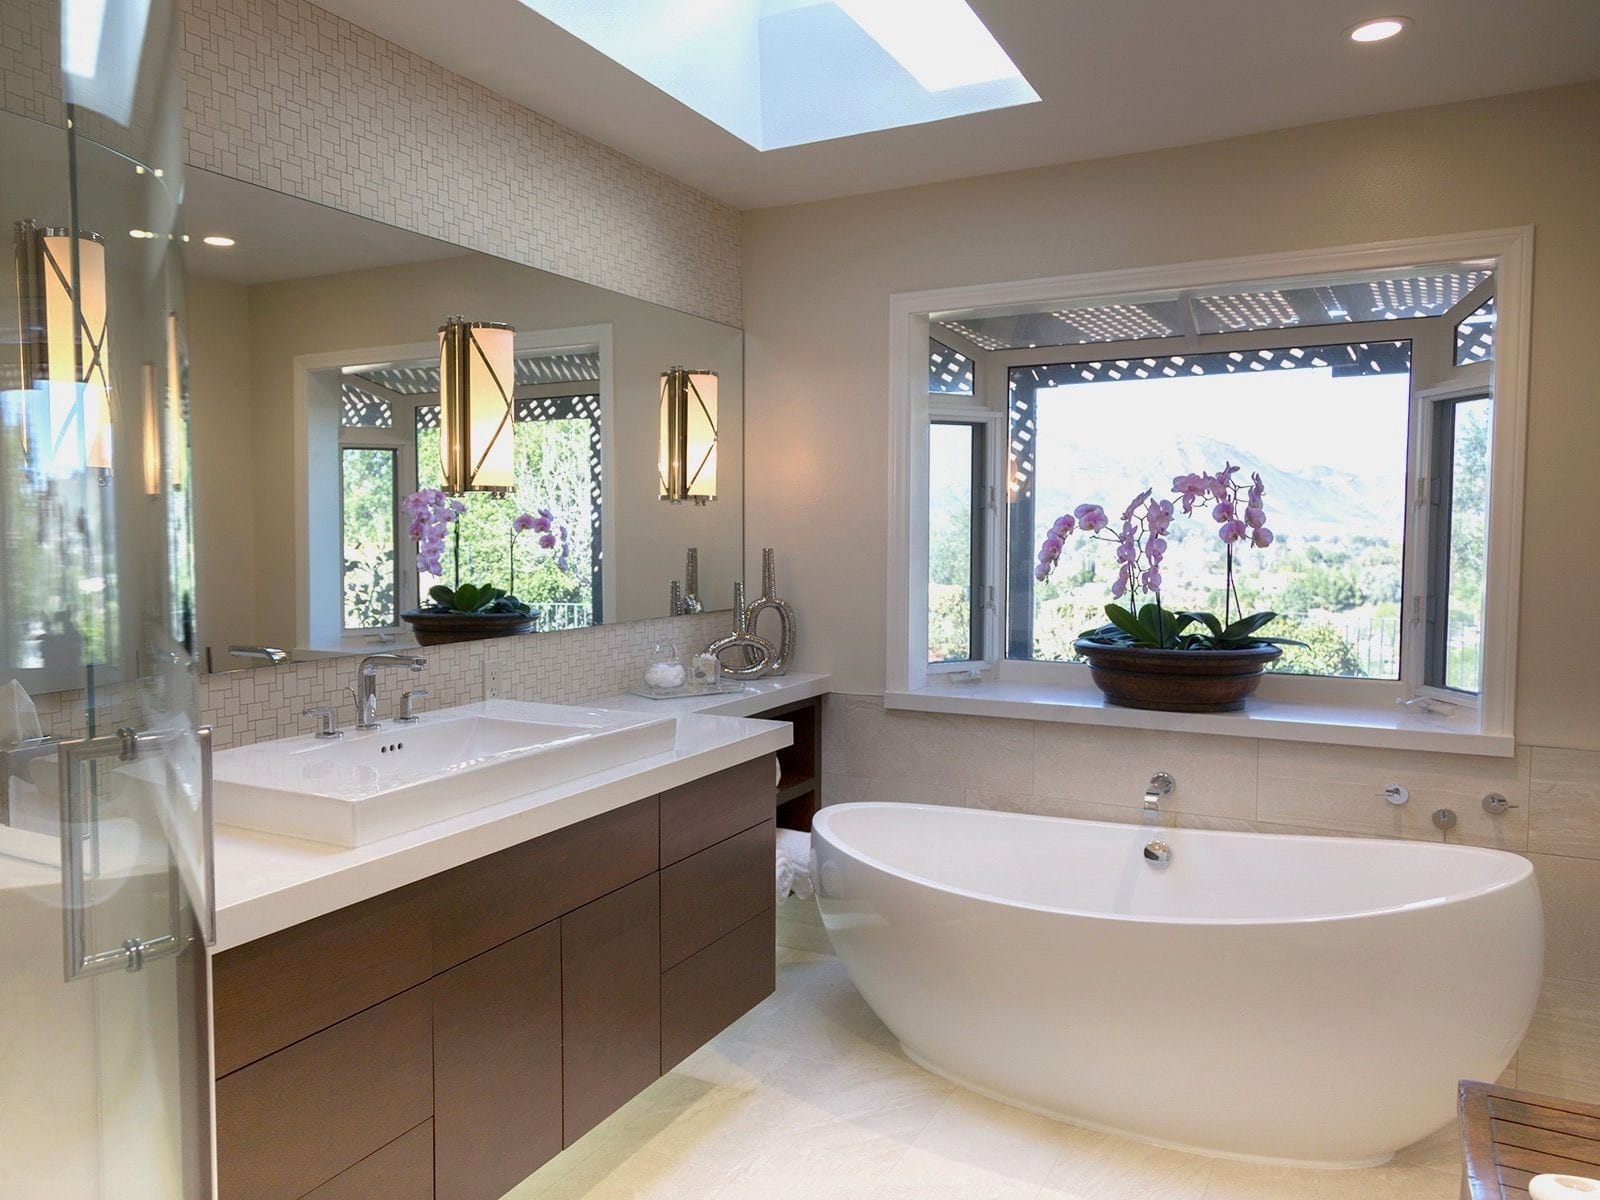 Beautiful bathroom with floating vanity and free standing tub. Accents and wall sconces.